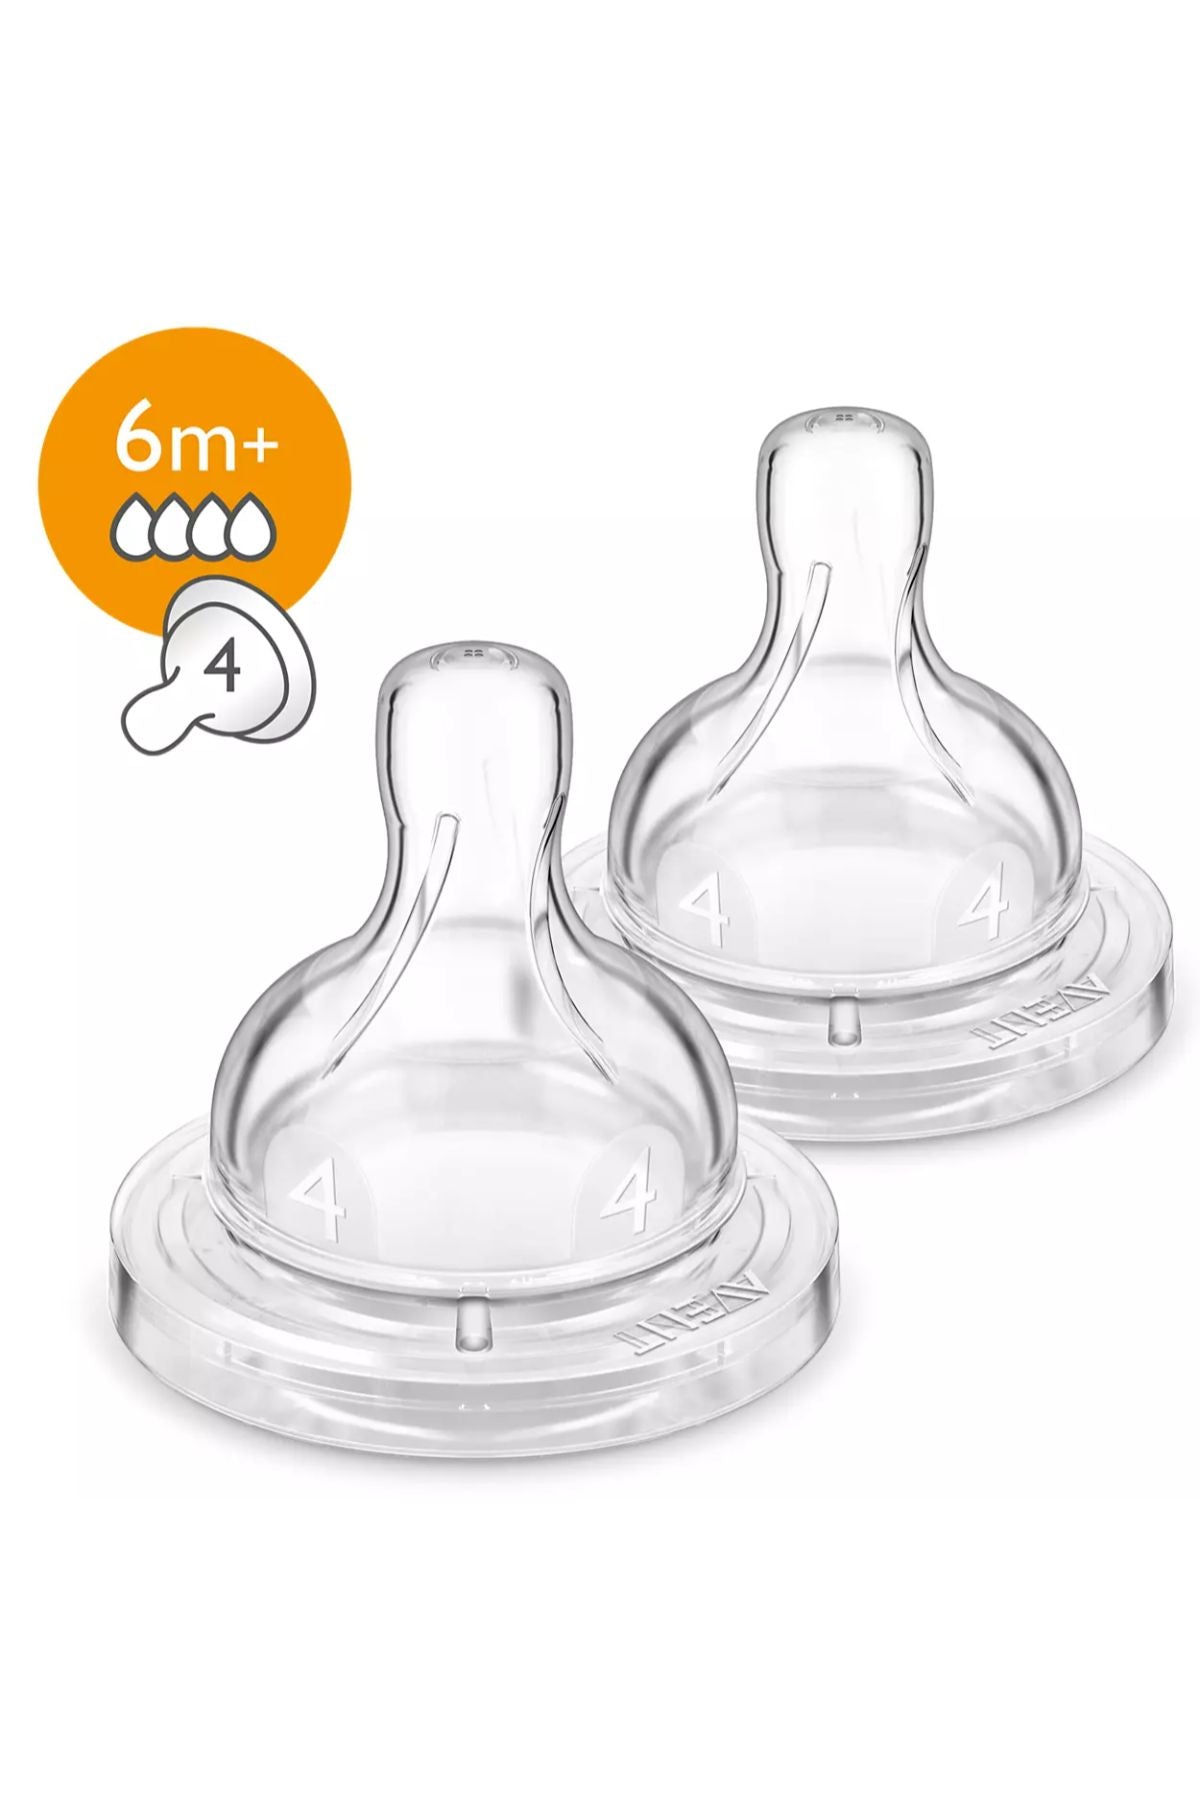 philips avent - silicone teat 6m+ / 4h pk2 - philips avent - silicone teat 6m+ / 4h pk2 - Cotton Candy™ Pakistan